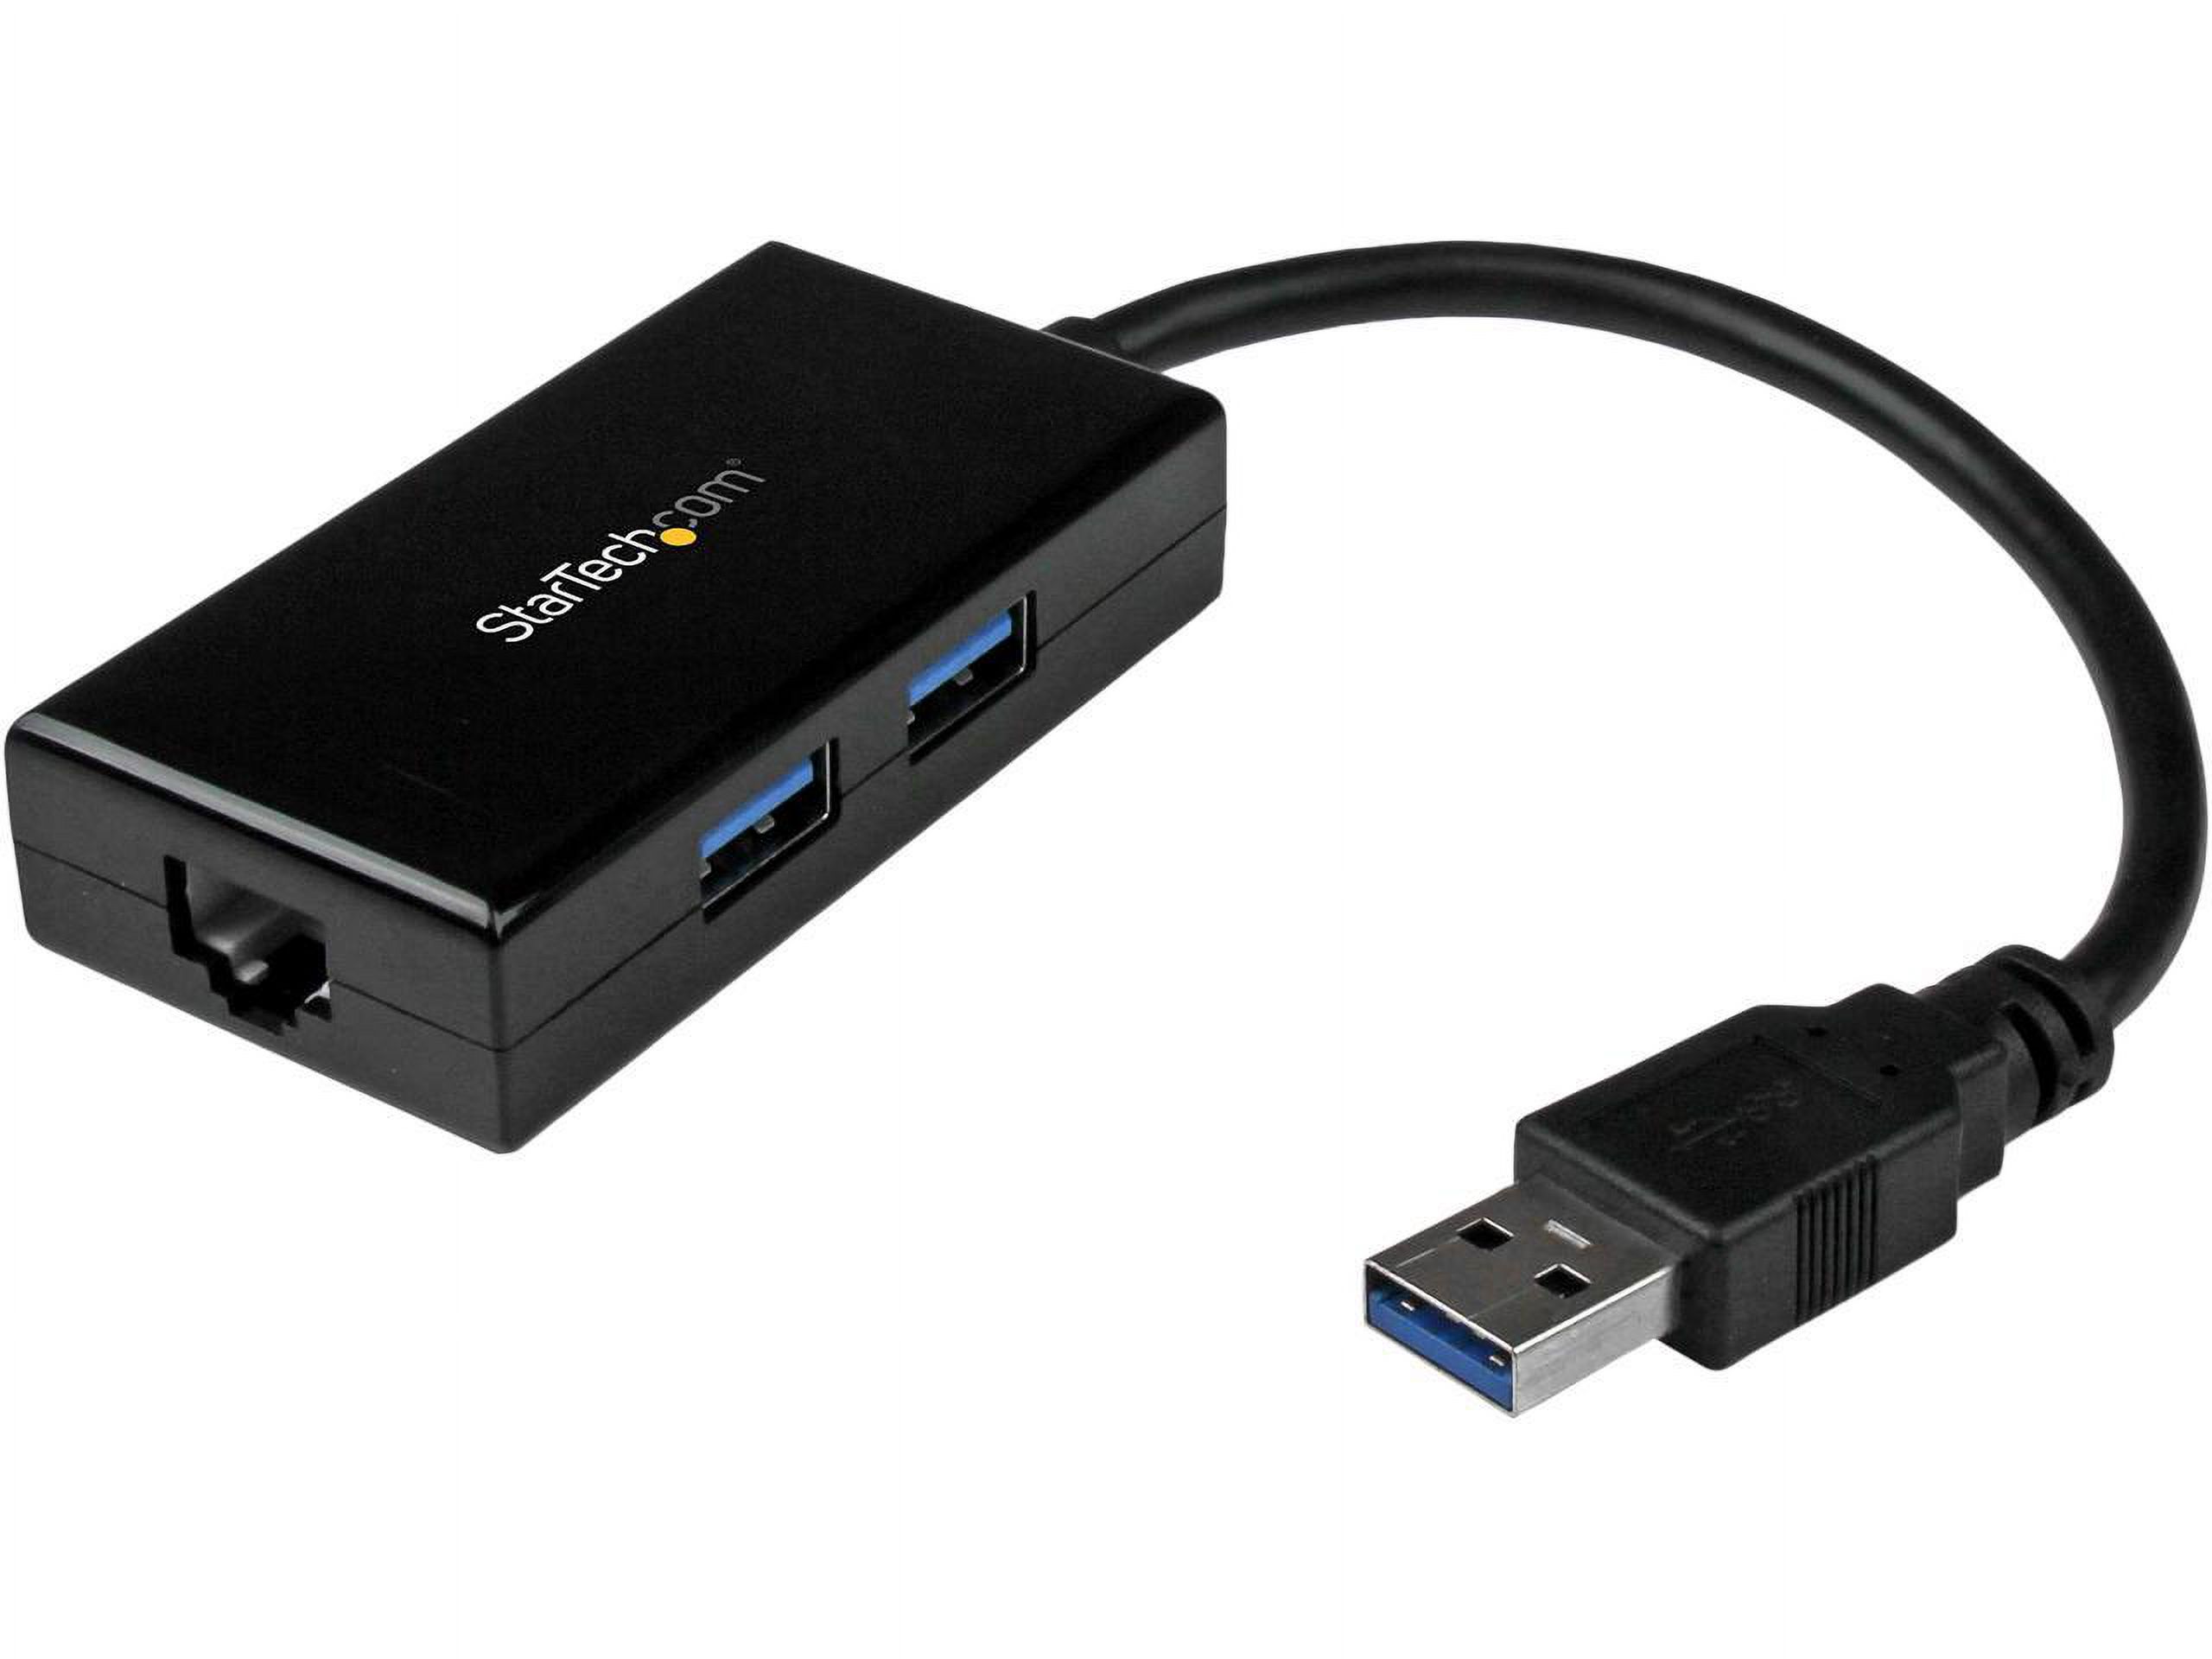 Startech USB 3.0 to Gigabit Network Adapter with Built-In 2-Port USB Hub - Native Driver Support (Windows, Mac and Chrome OS) - Add Gigabit Ethernet connectivity and two USB 3.0 ports to your lapto... - image 1 of 6